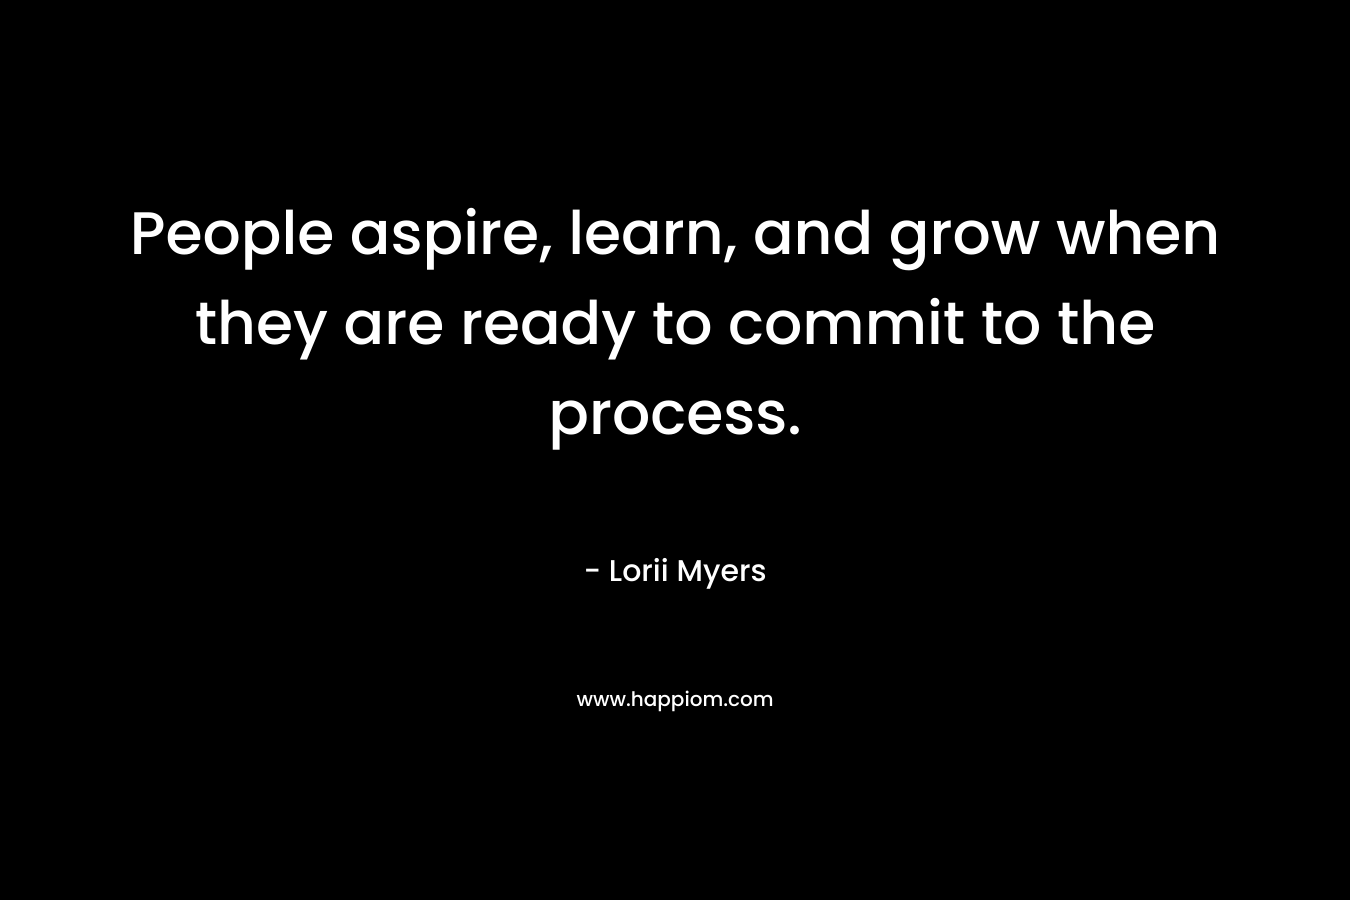 People aspire, learn, and grow when they are ready to commit to the process.